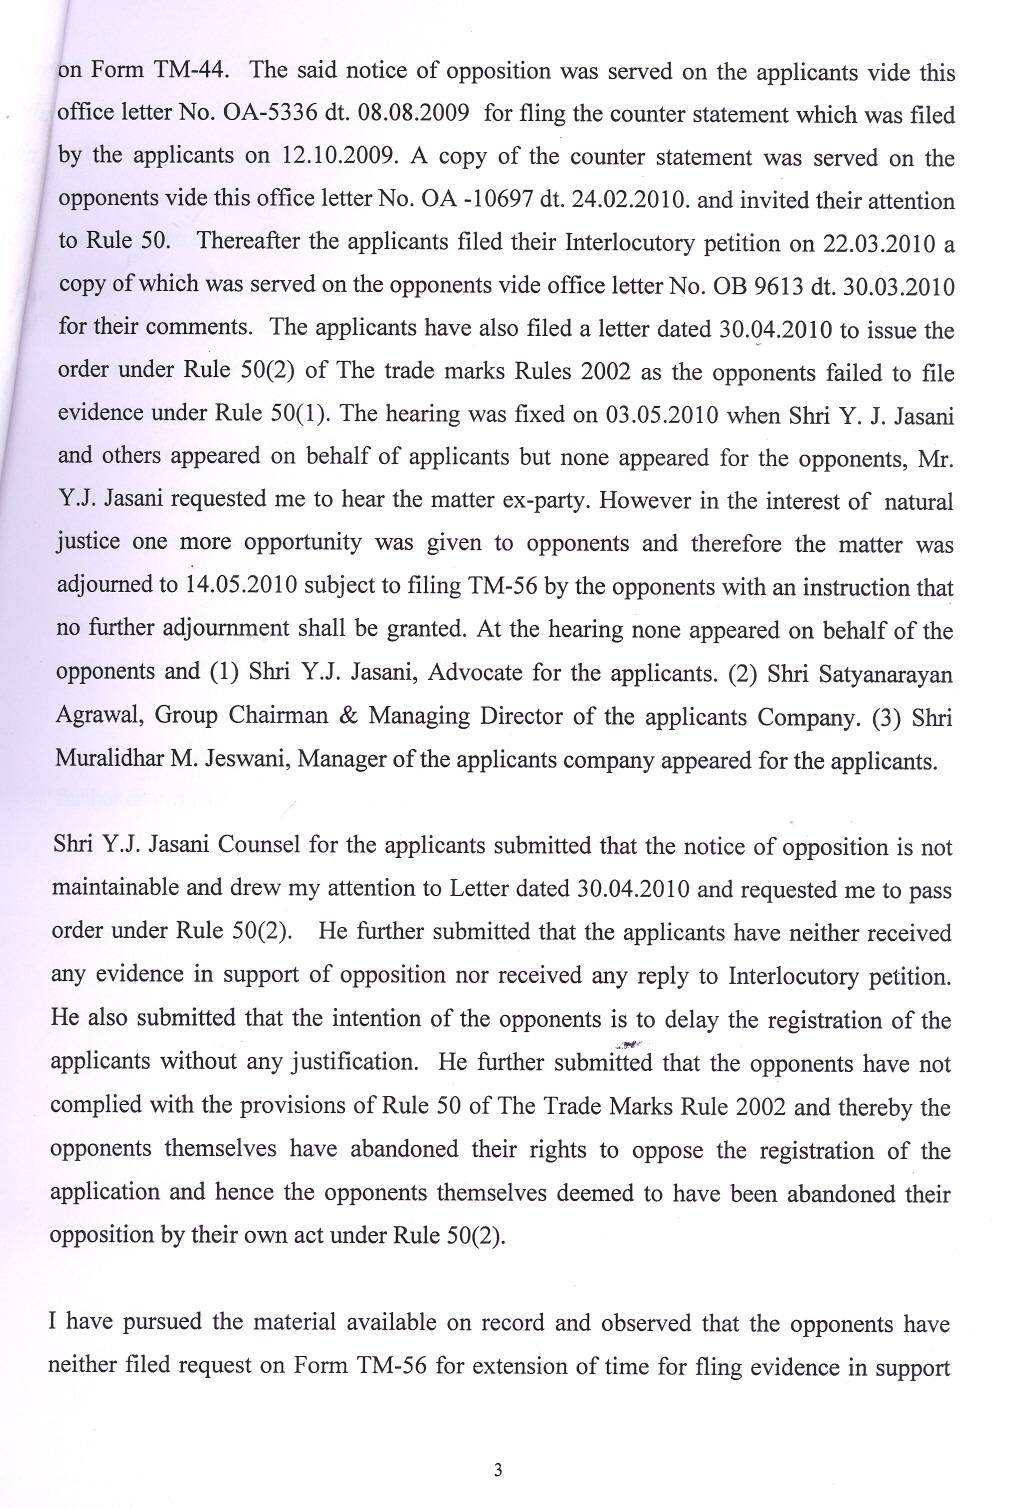 on Form TM-44. The said notice of opposition was served on the applicants vide this office letter No. OA-5336 dt. 08.08.2009 for fling the counter statement which was filed by the applicants on 12.10.